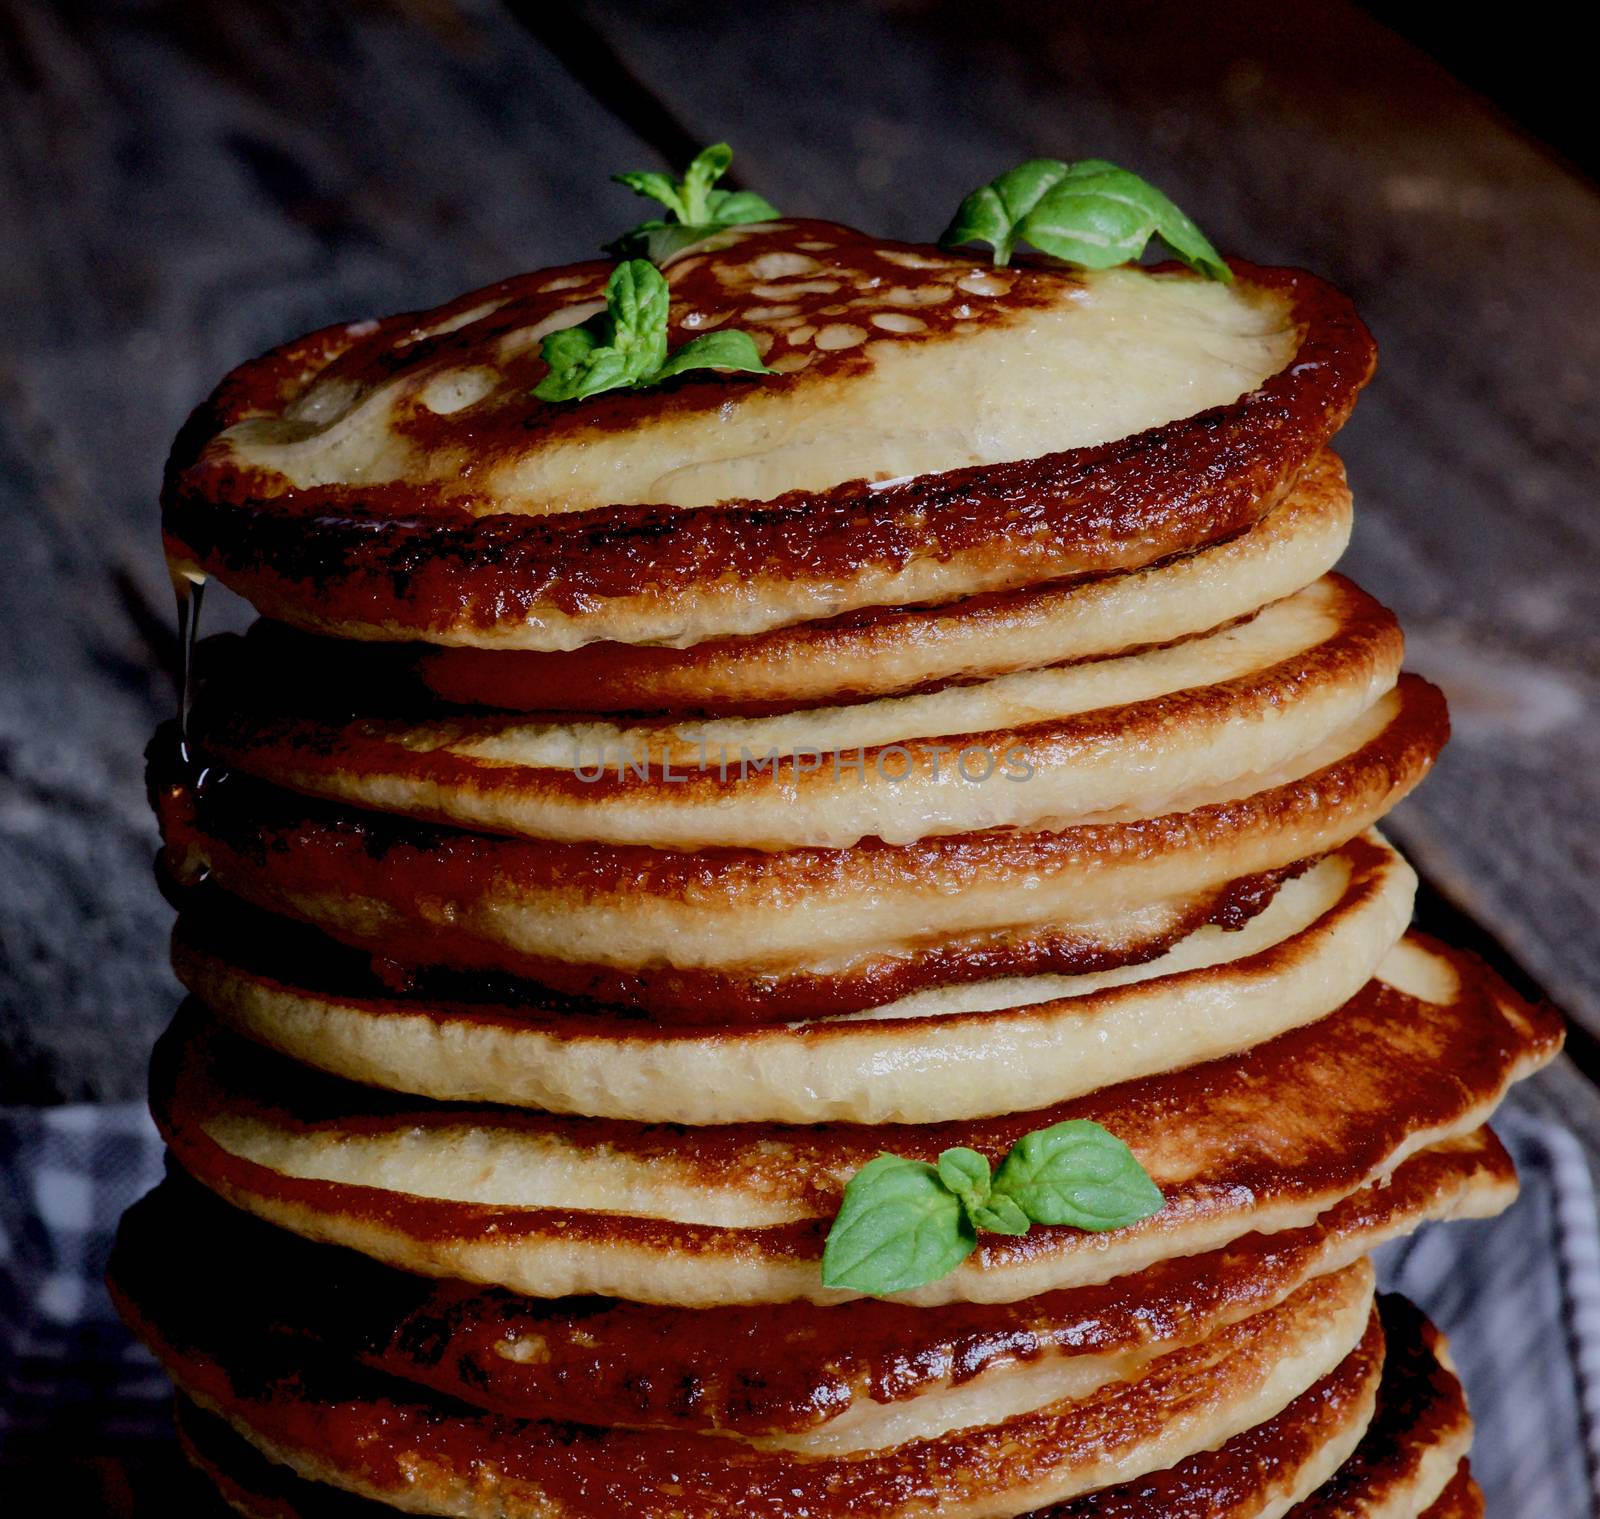 Stack of Pancakes by zhekos